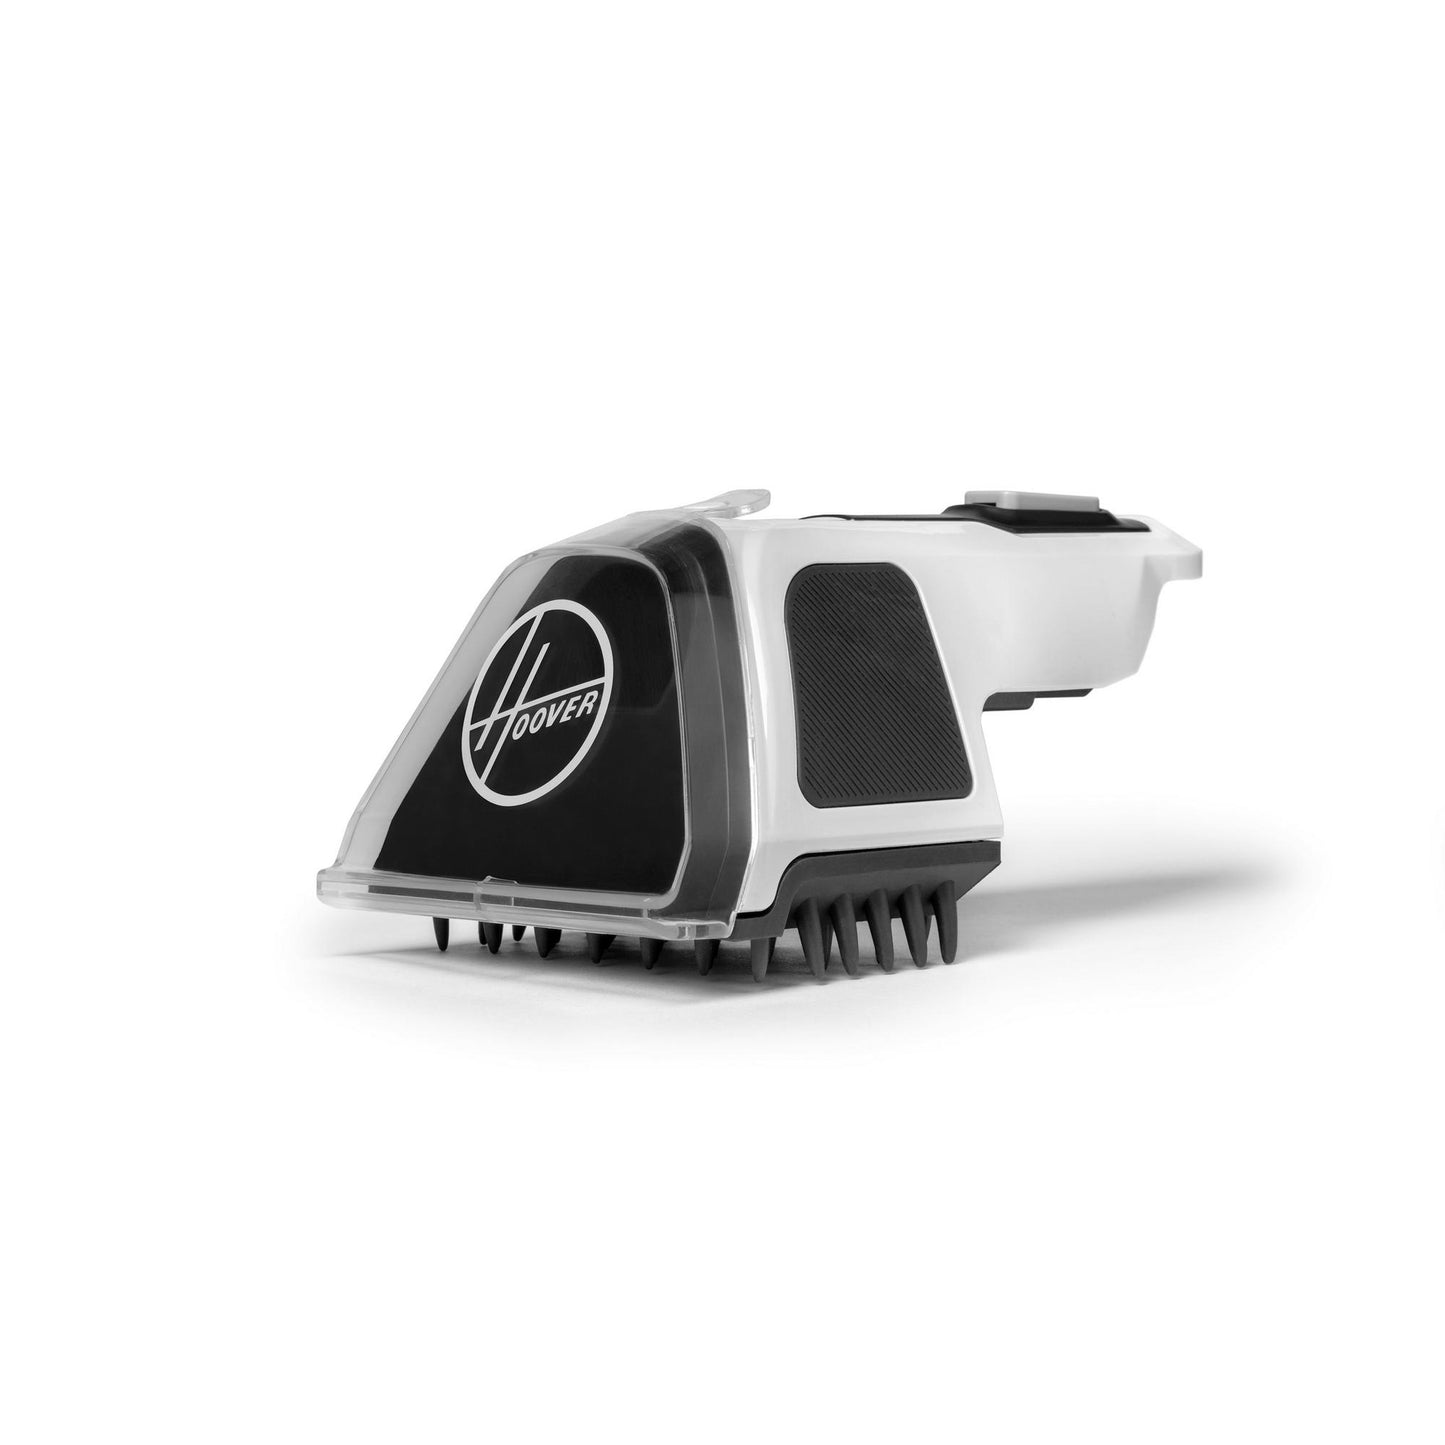 Universal Antimicrobial Pet Tool for Hoover Carpet Cleaners